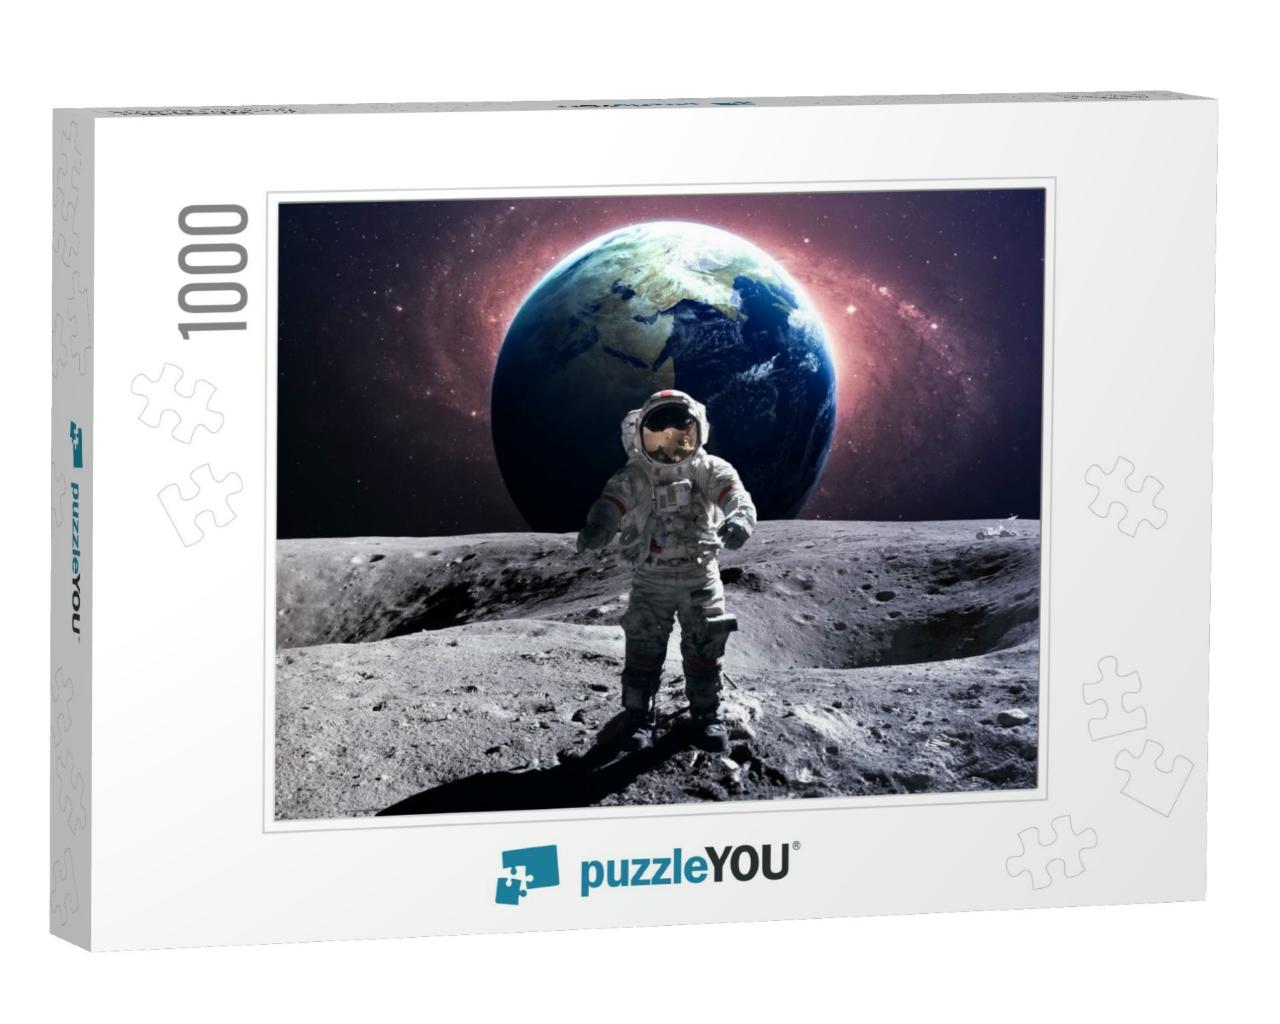 Brave Astronaut At the Spacewalk on the Moon. This Image... Jigsaw Puzzle with 1000 pieces